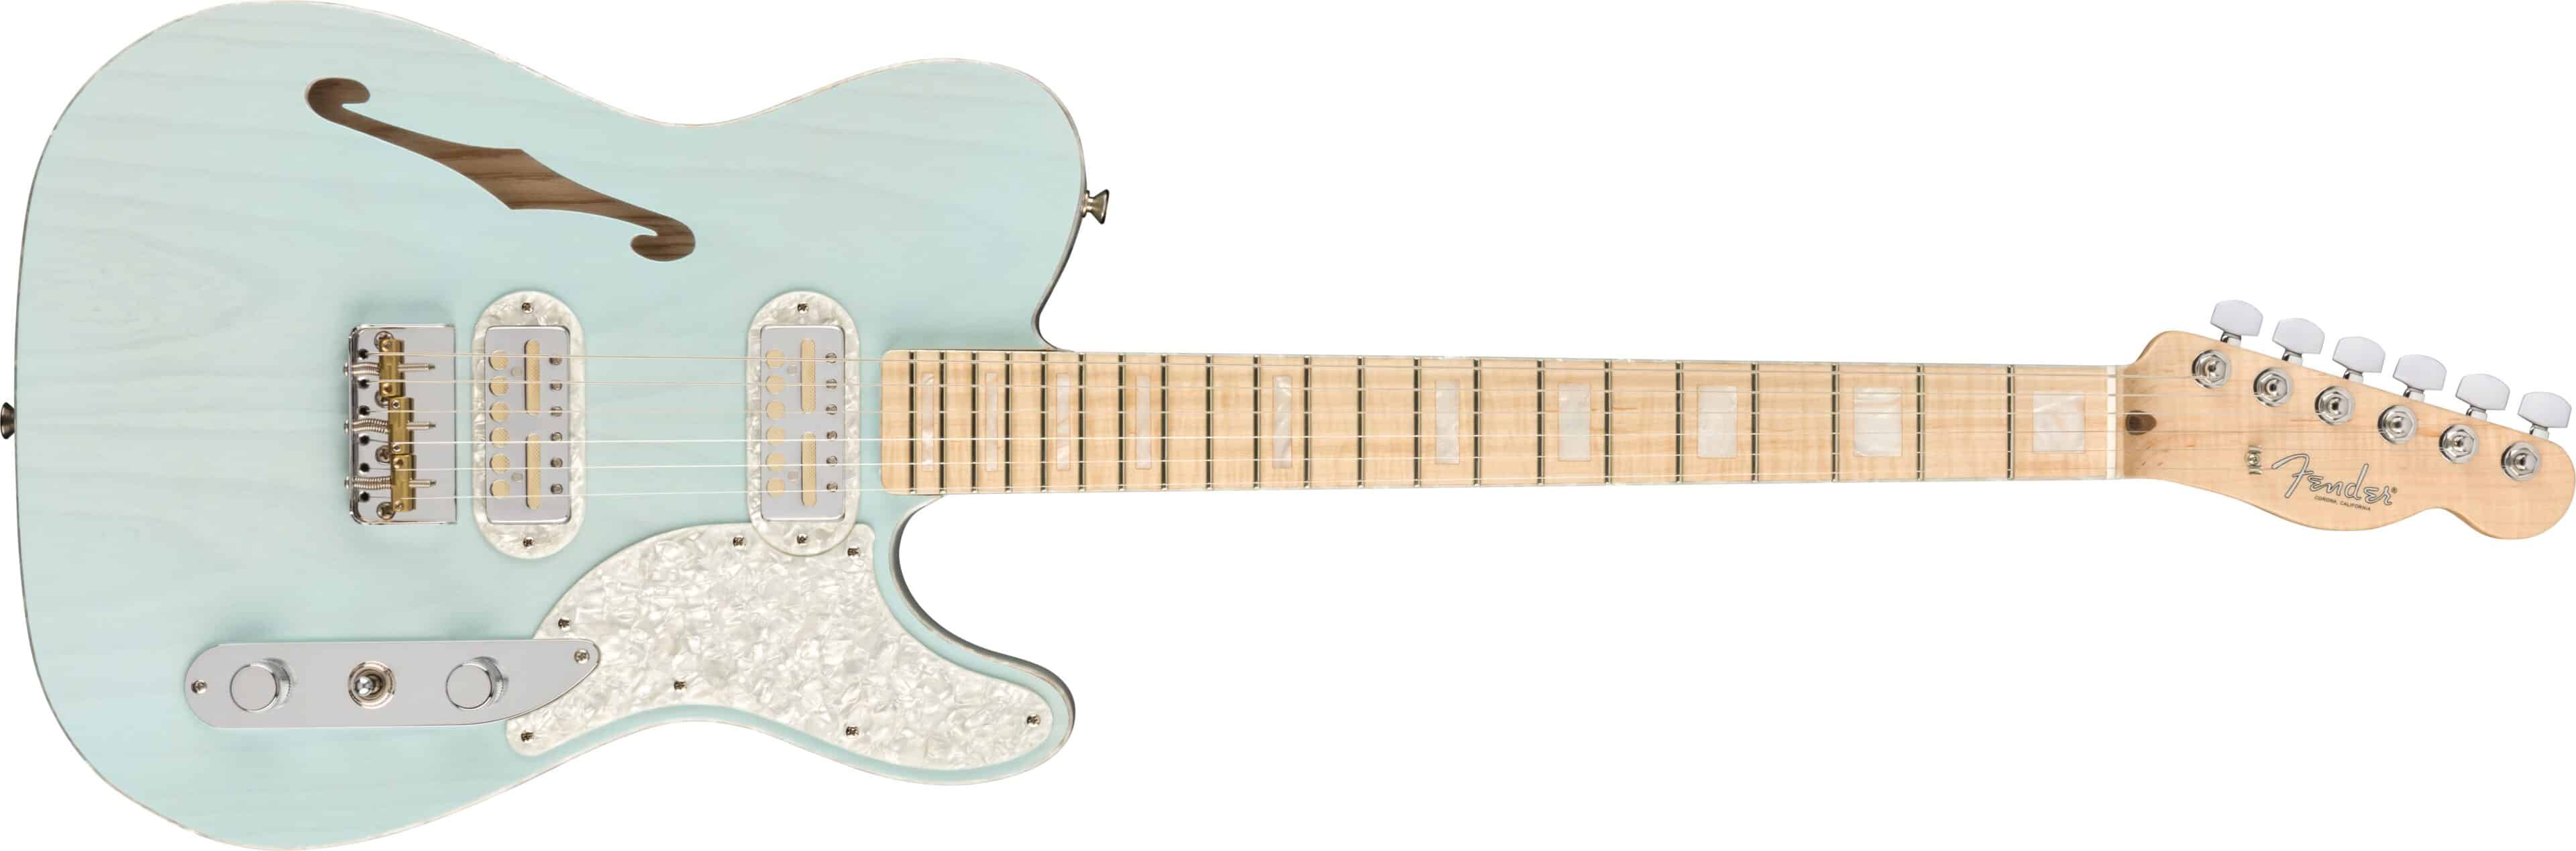 Fender Wraps Up 2020 With Their Parallel Universe Collection Tele® Mágico